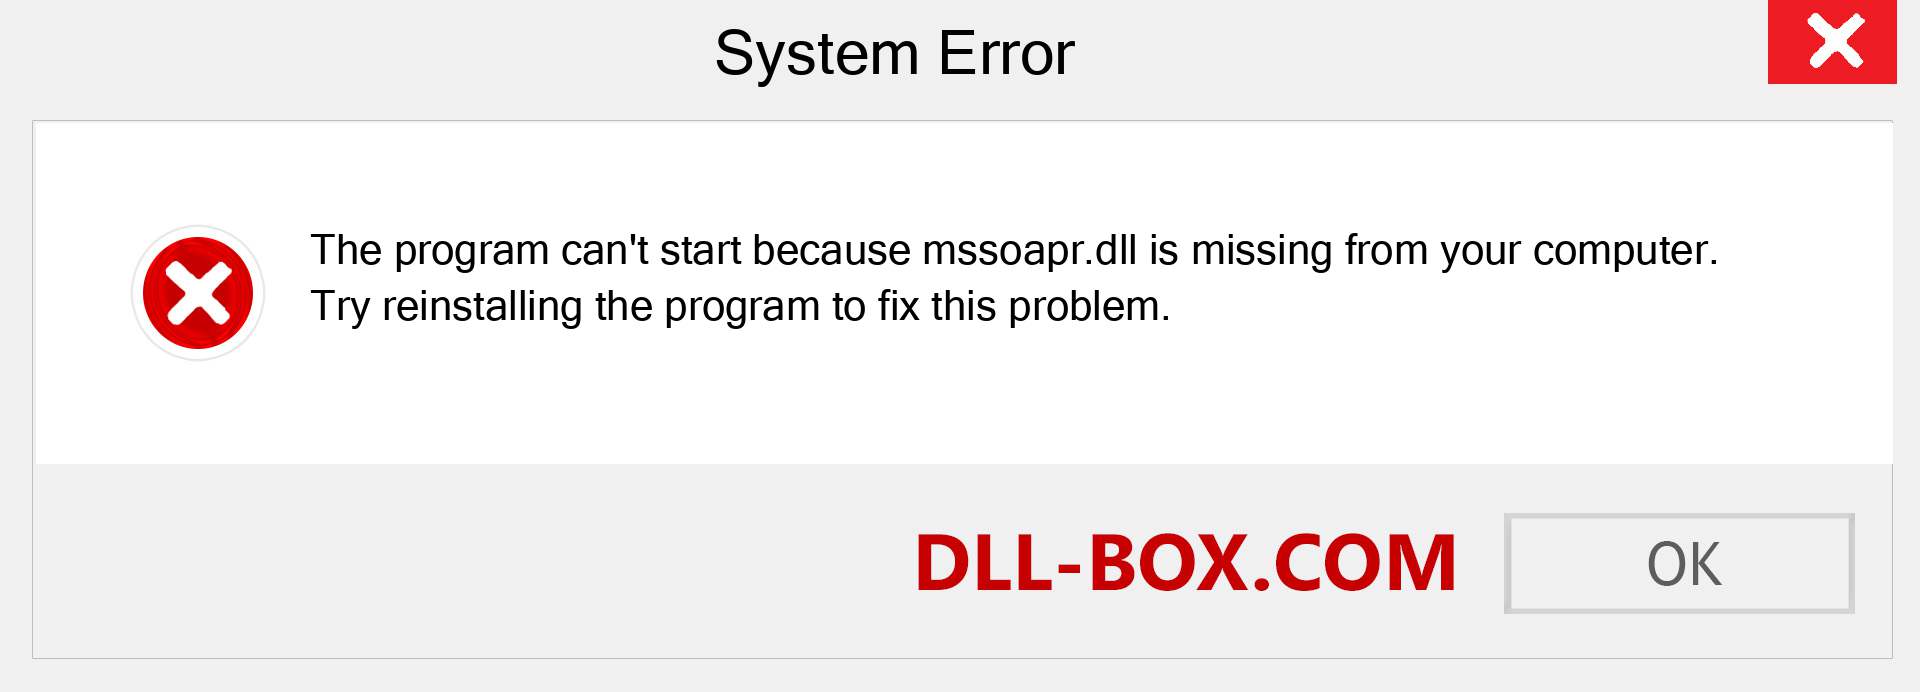  mssoapr.dll file is missing?. Download for Windows 7, 8, 10 - Fix  mssoapr dll Missing Error on Windows, photos, images